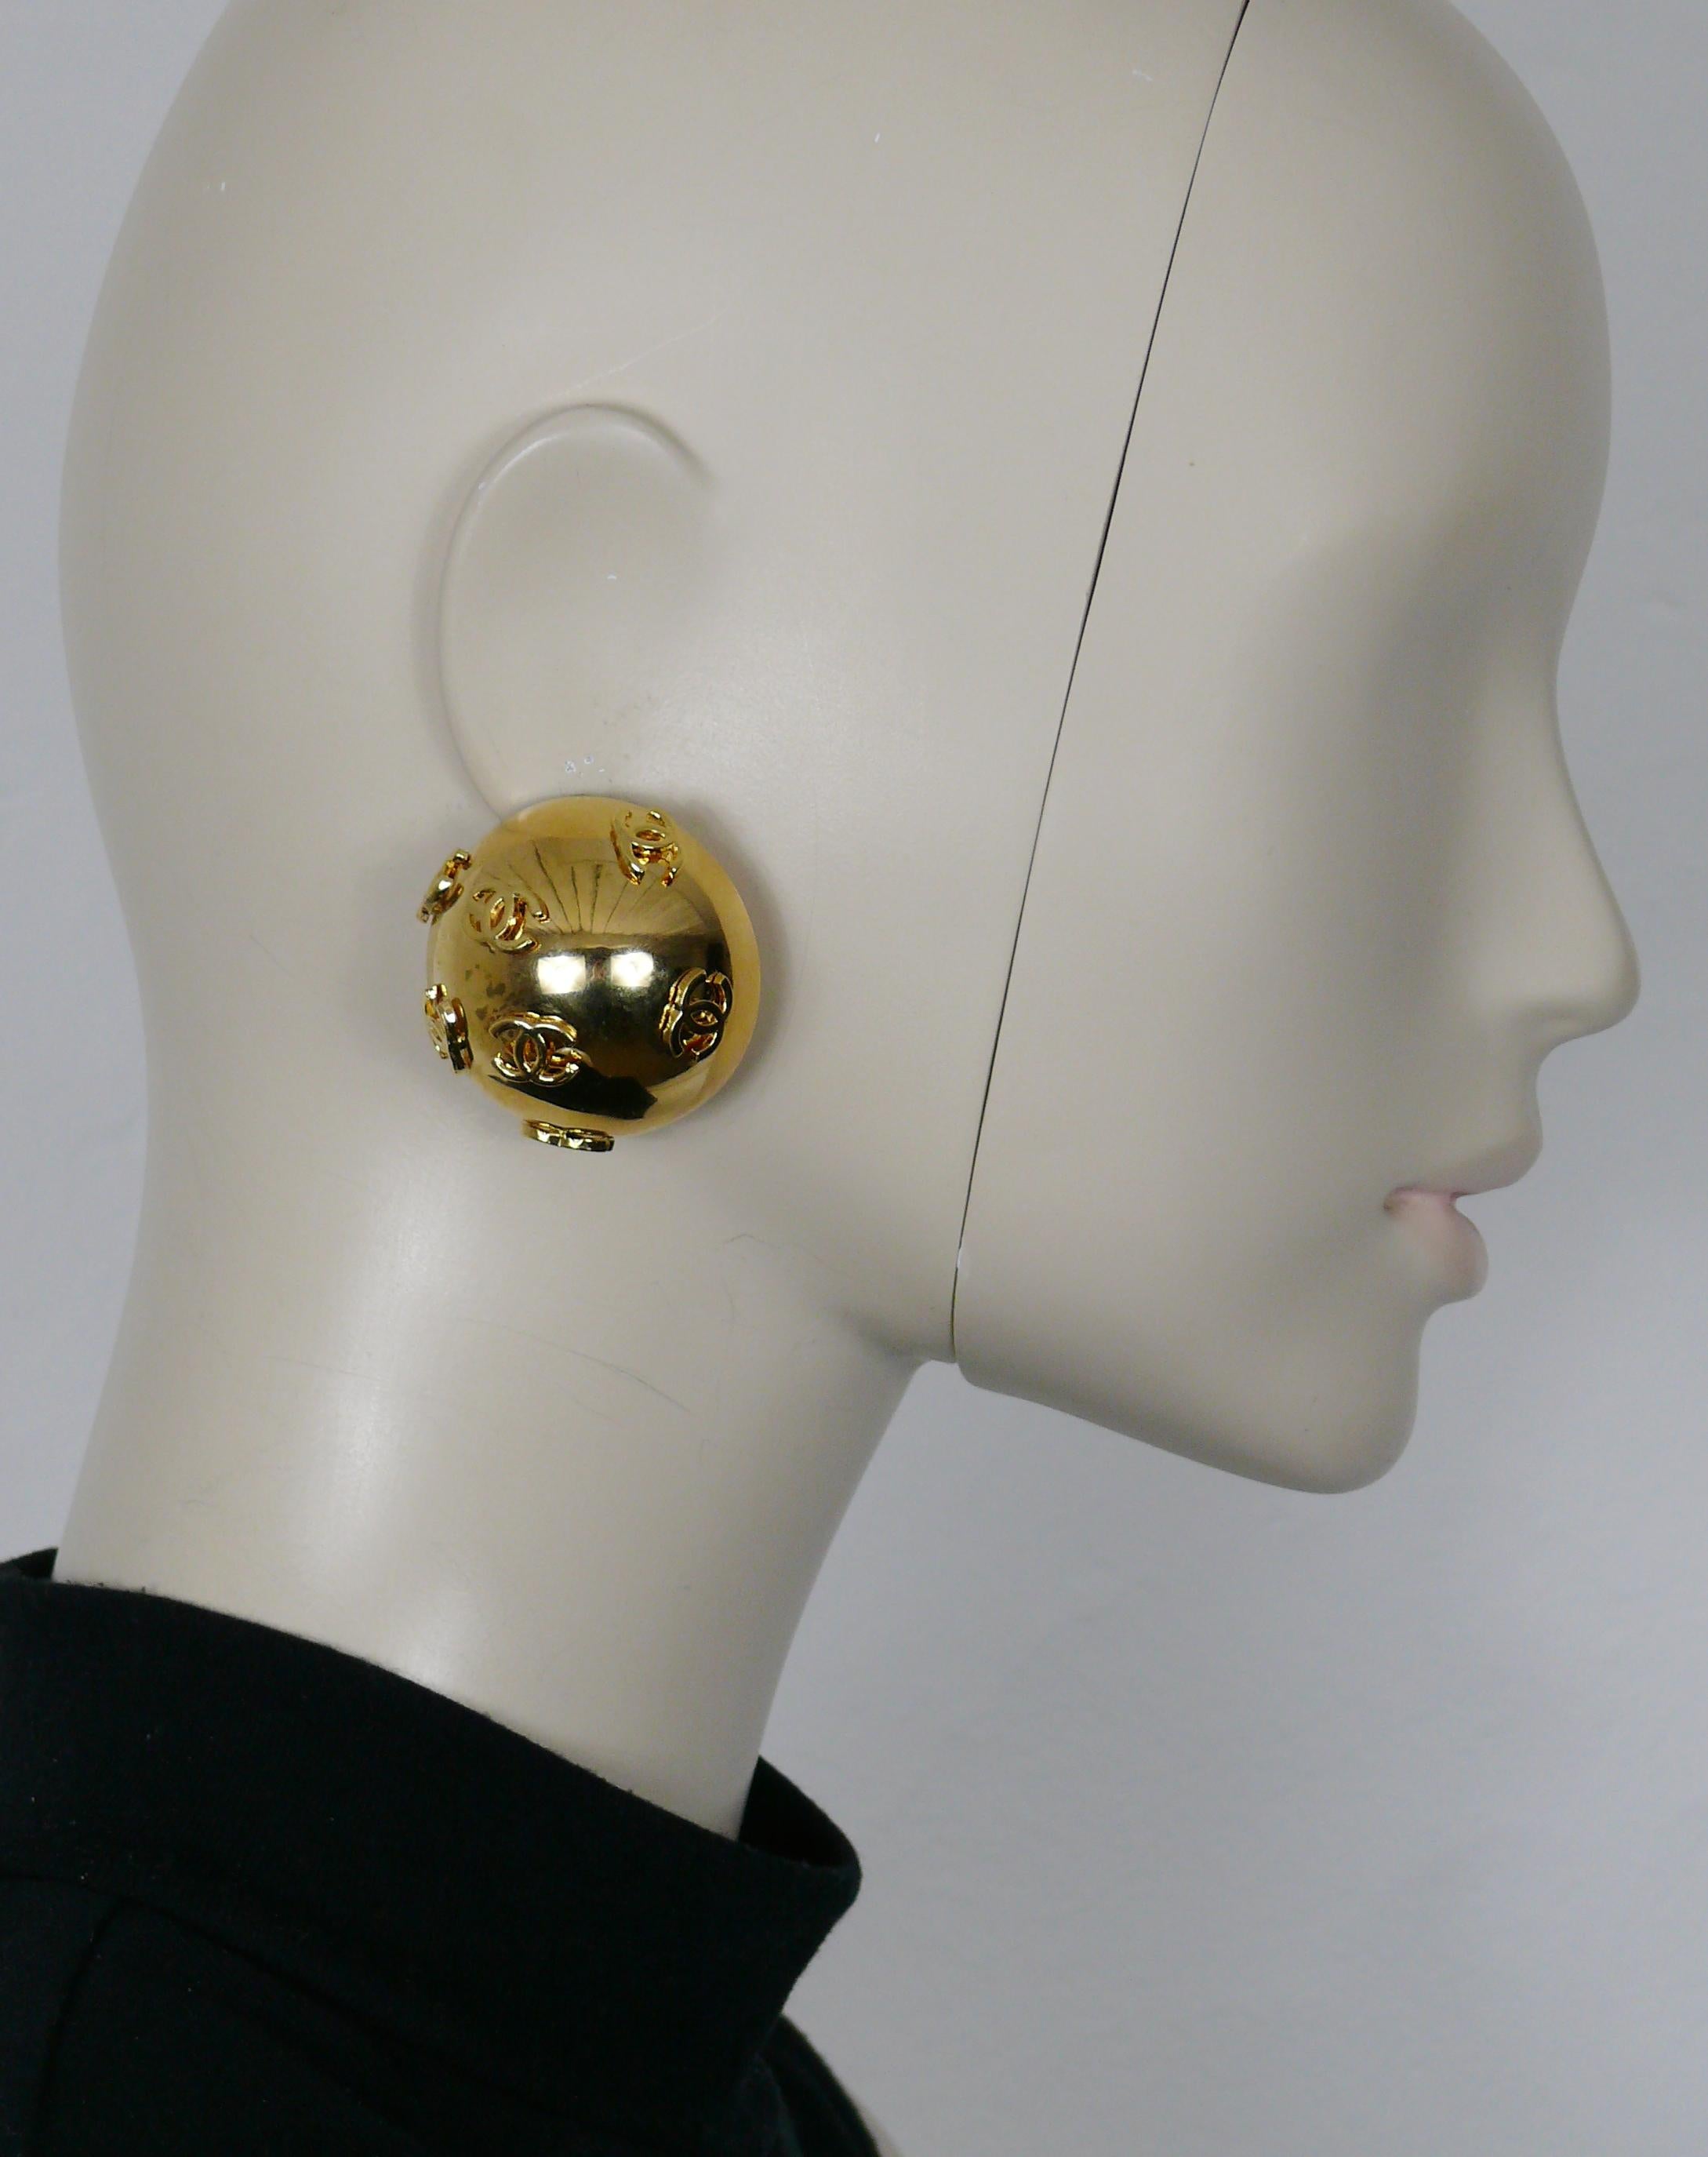 CHANEL by KARL LAGERFELD vintage oversized gold tone dome clip-on earrings featuring CC logos all over.

Collection n°27 (year : 1992).
Costume jewelry creative director : VICTOIRE DE CASTELLANE.

Embossed CHANEL 2 7 Made in France.

Indicative